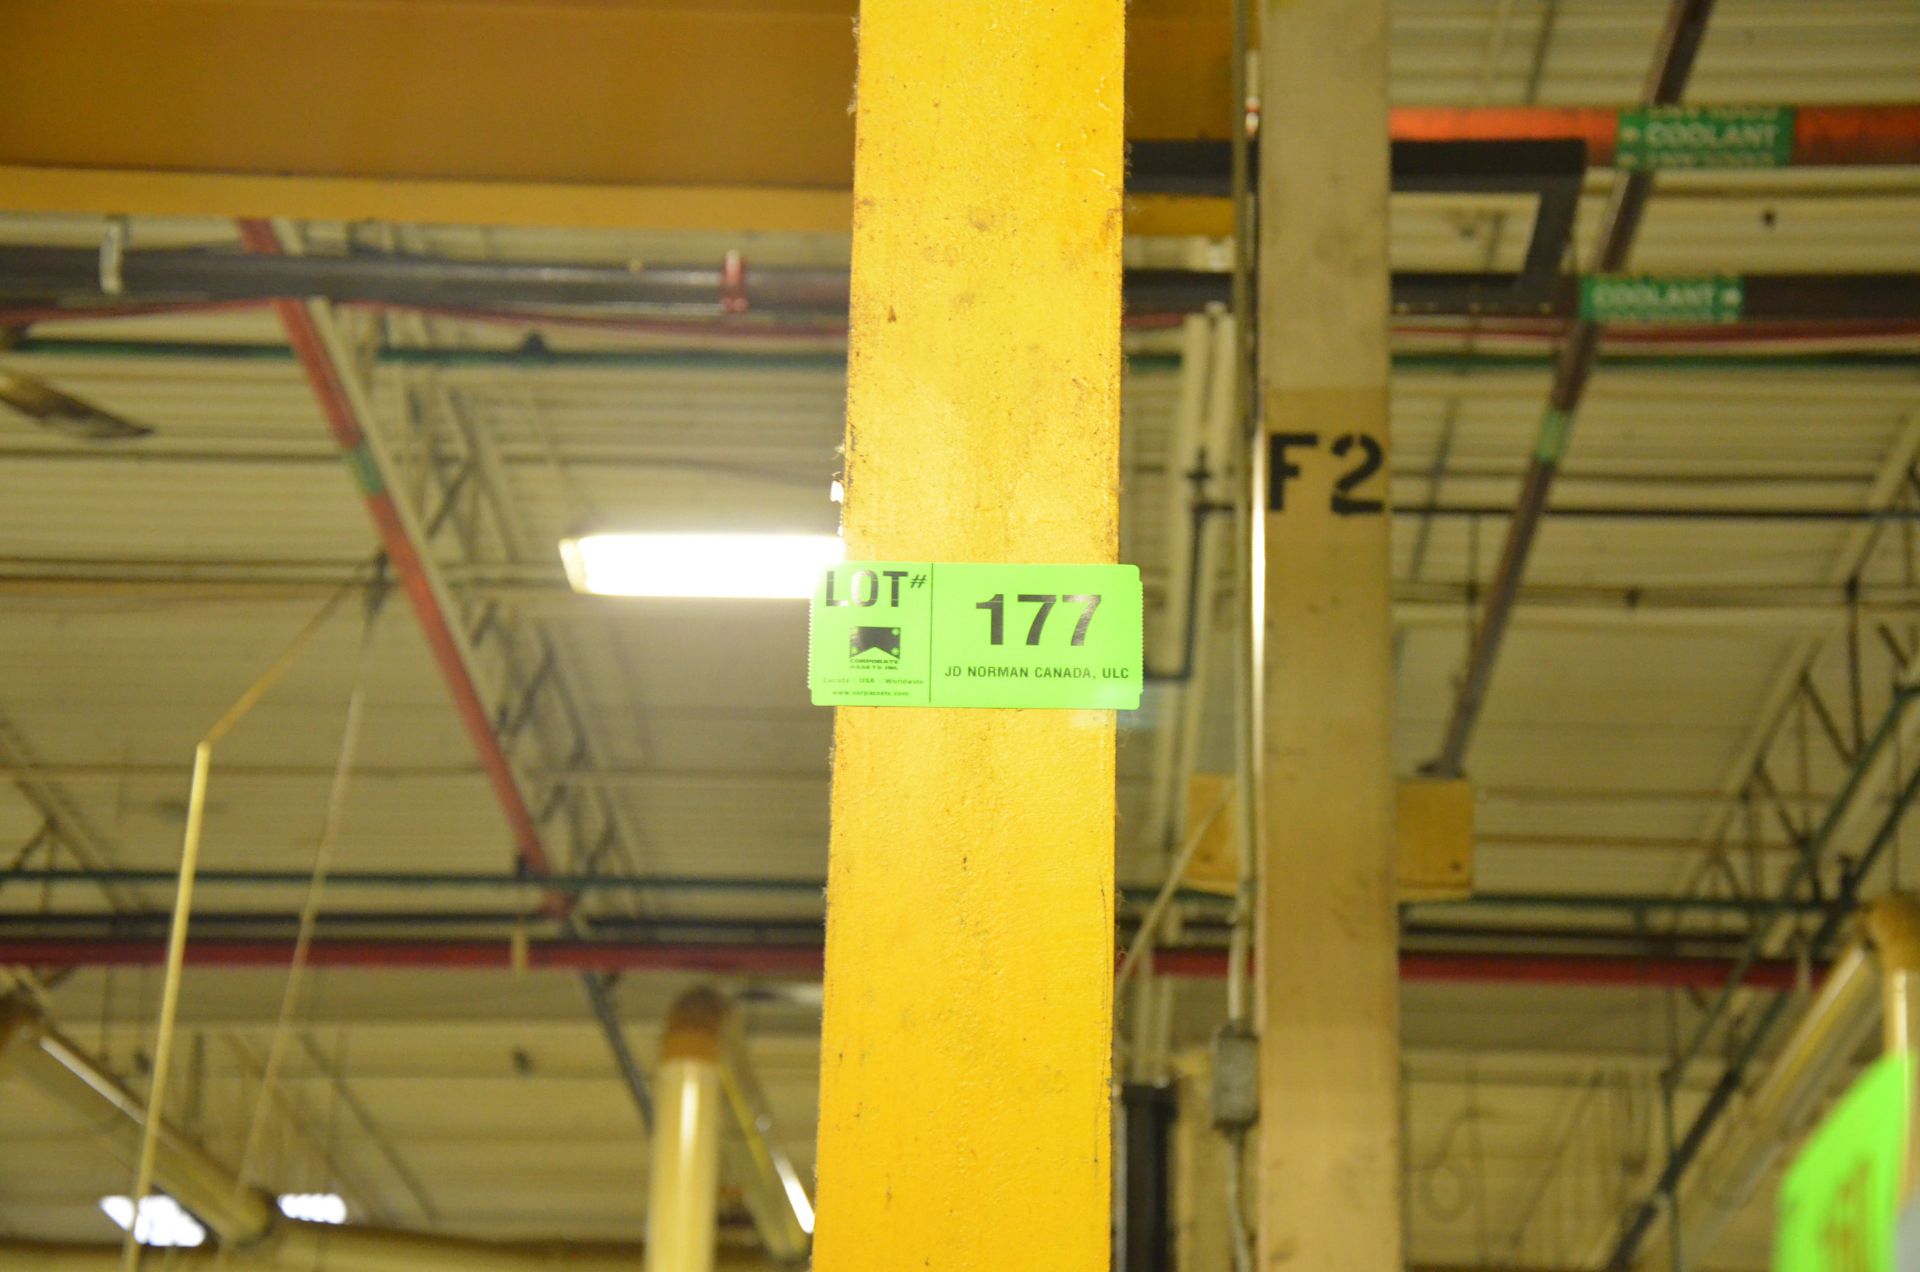 MFG UNKNOWN 2,000 LBS CAPACITY FREESTANDING GANTRY CRANE SYSTEM WITH APPROX 140" SPAN, 160" - Image 3 of 3